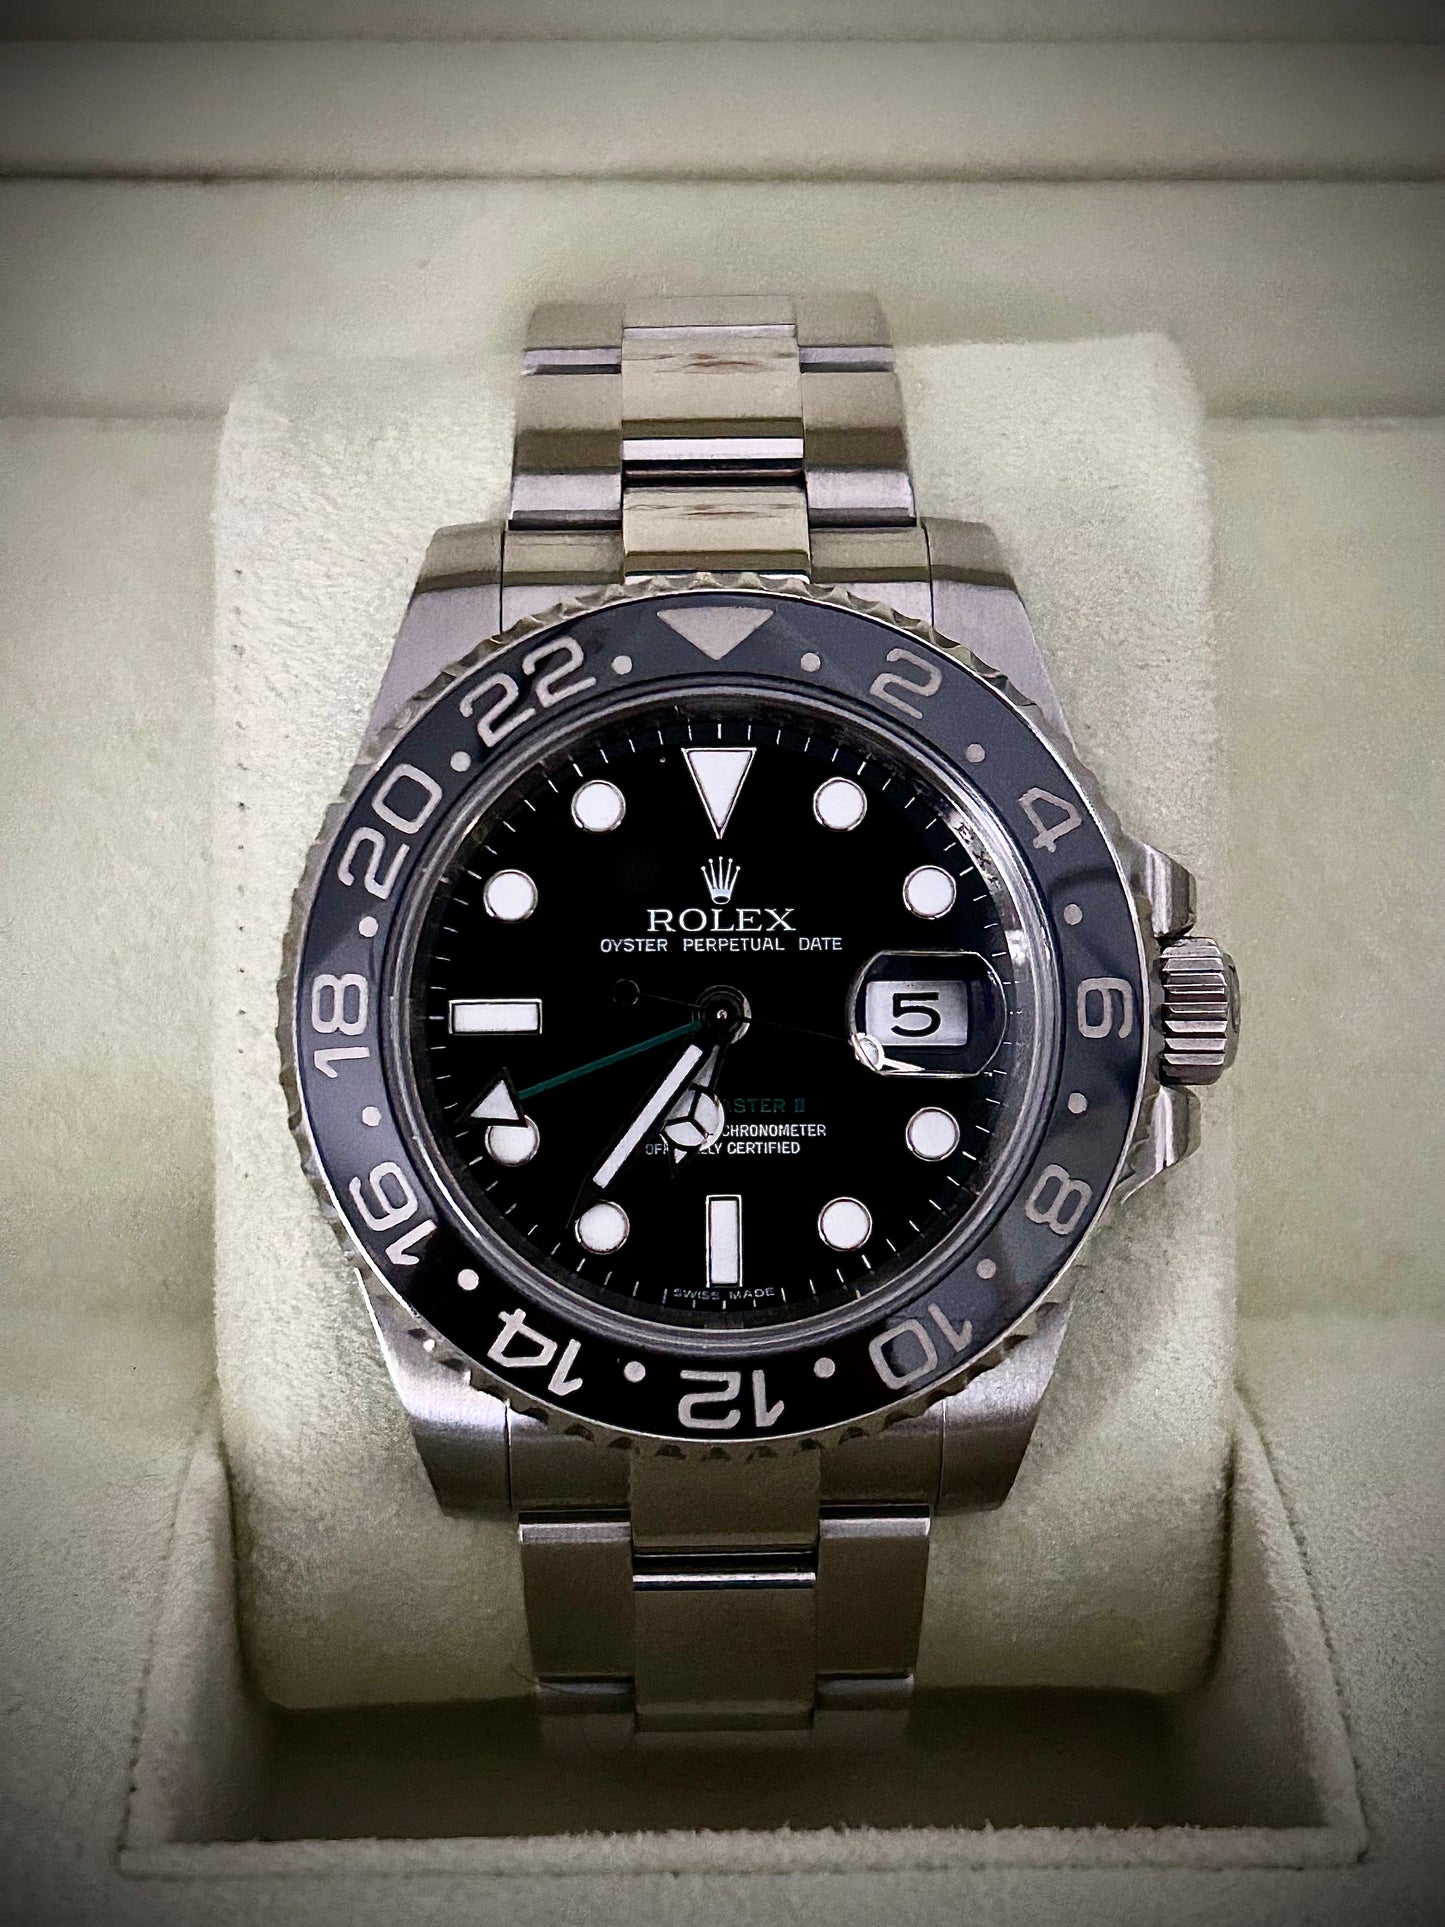 2009 ROLEX GMT MASTER II, BOX AND BOOKLETS, 116710LN, INC GST